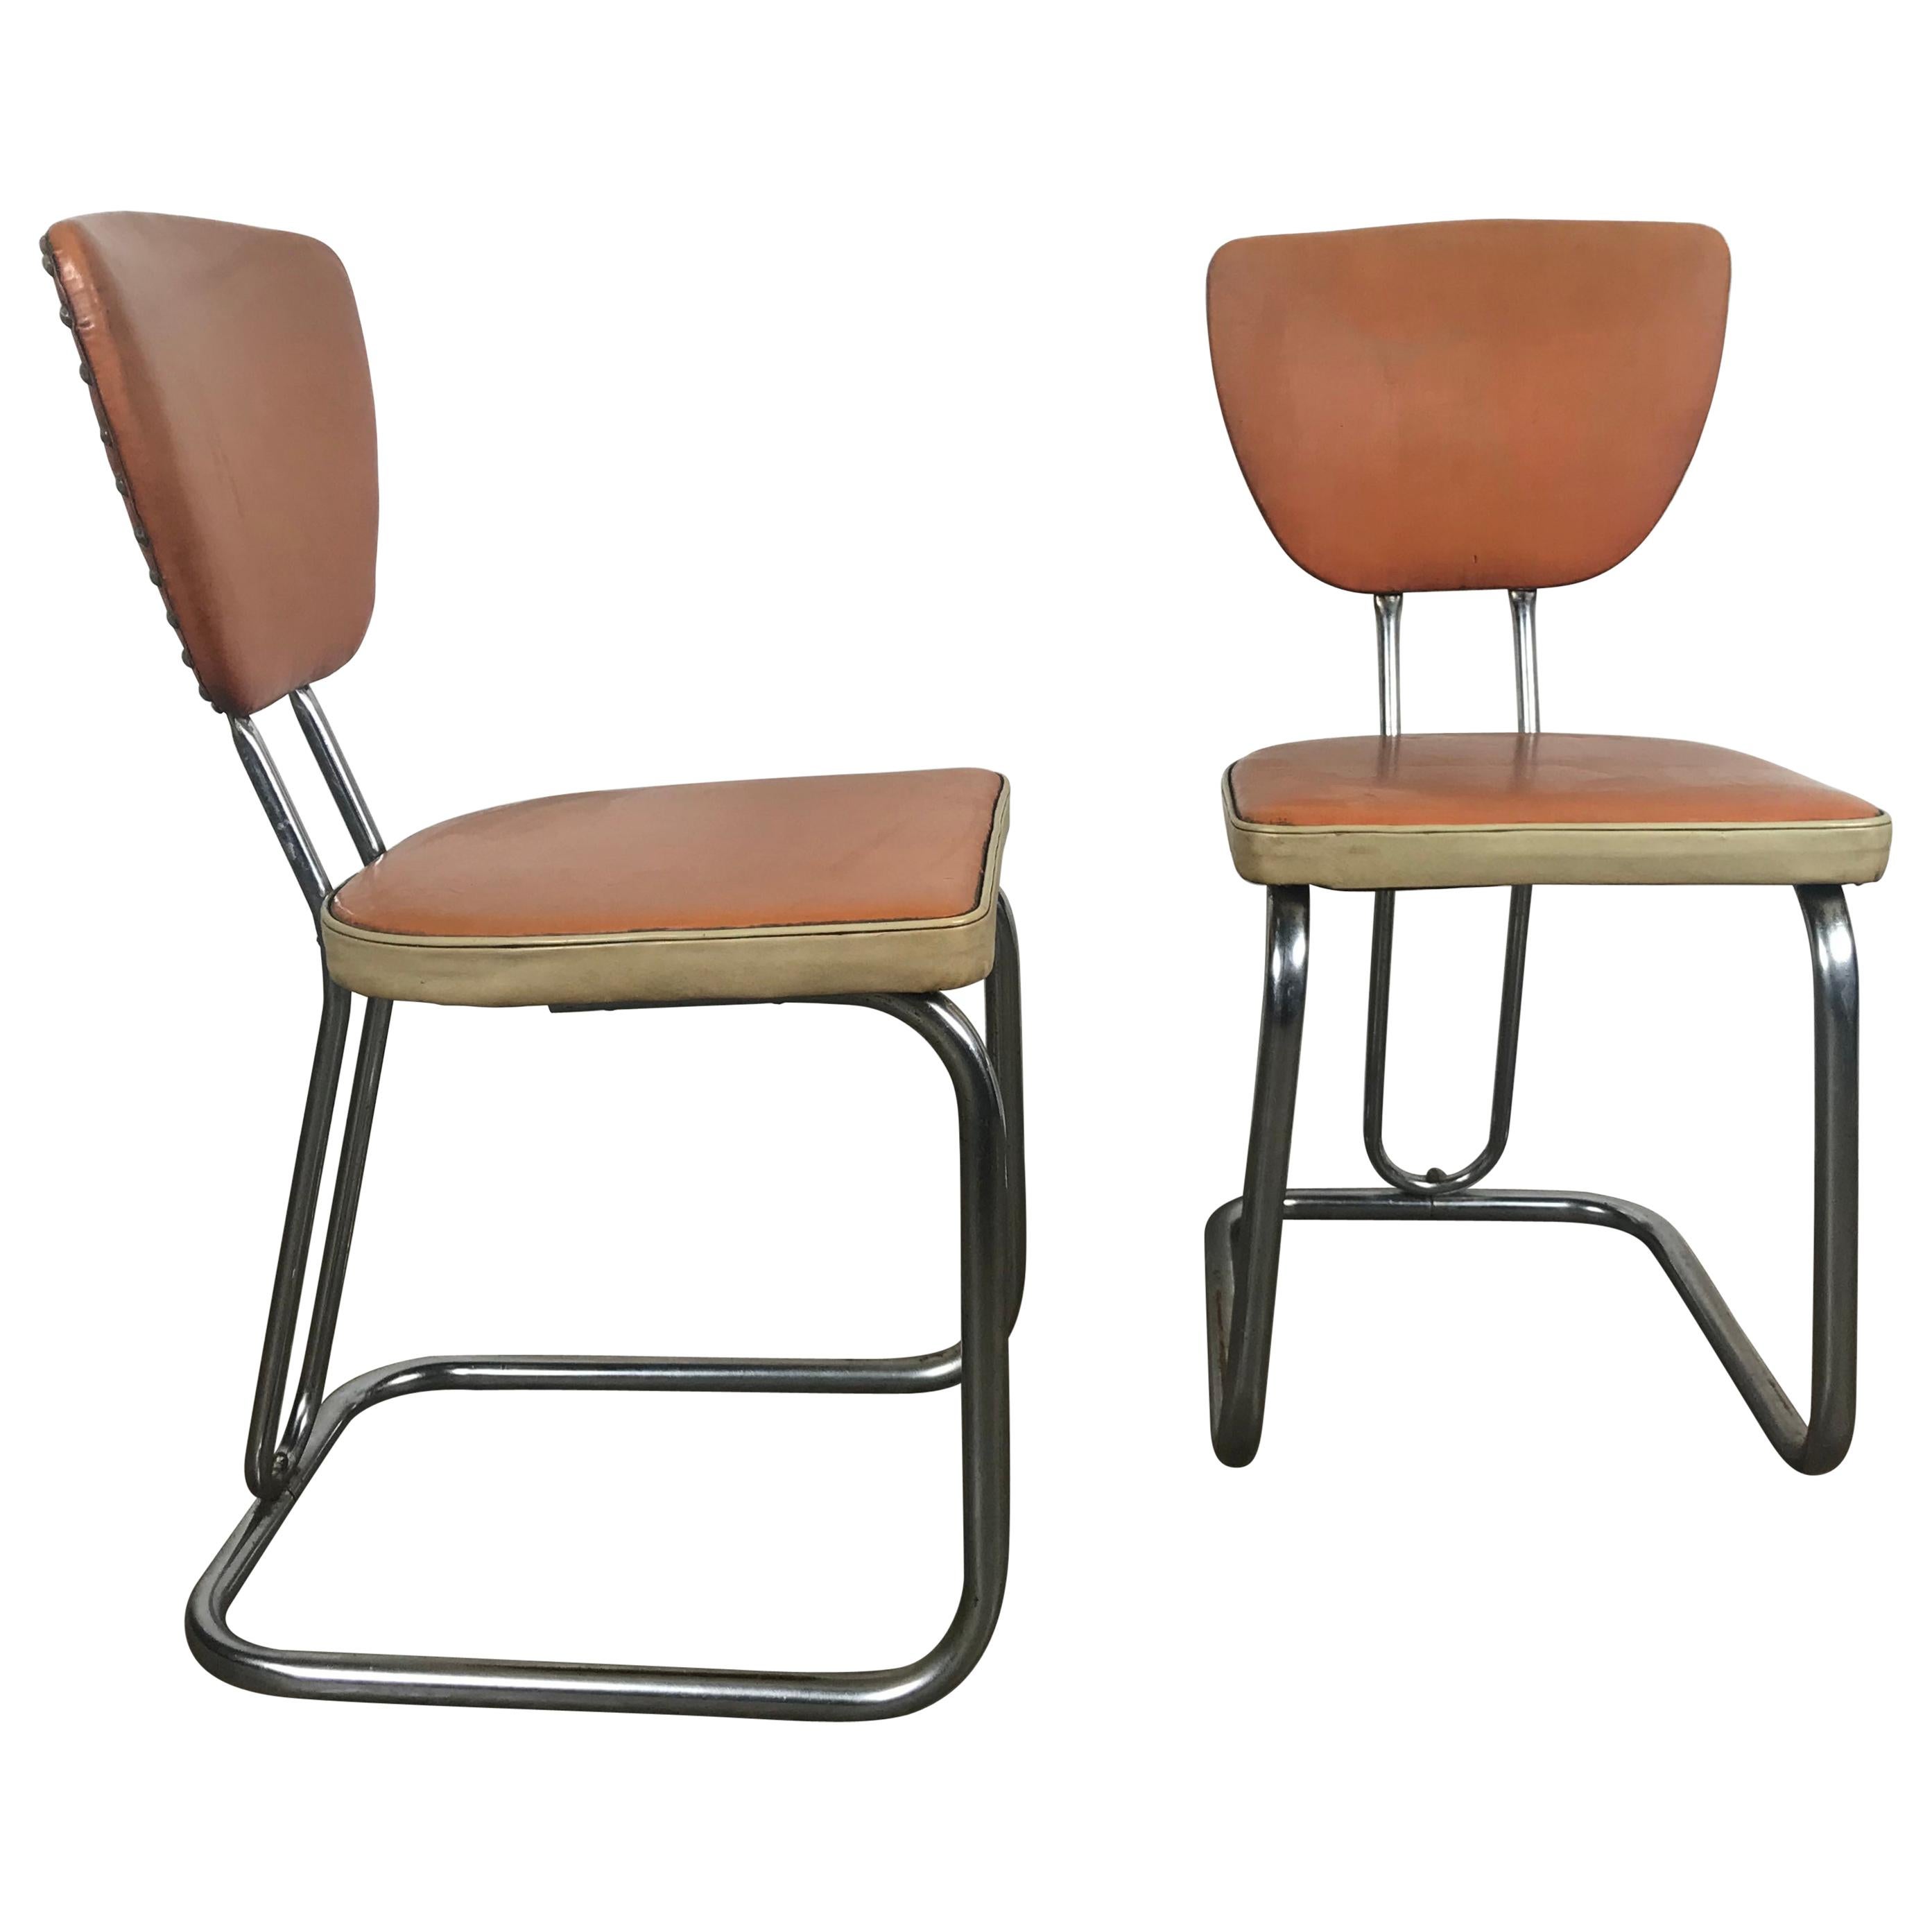 Pair of Stylized Art Deco, Machine Age Chrome Side Chairs by Daystrom